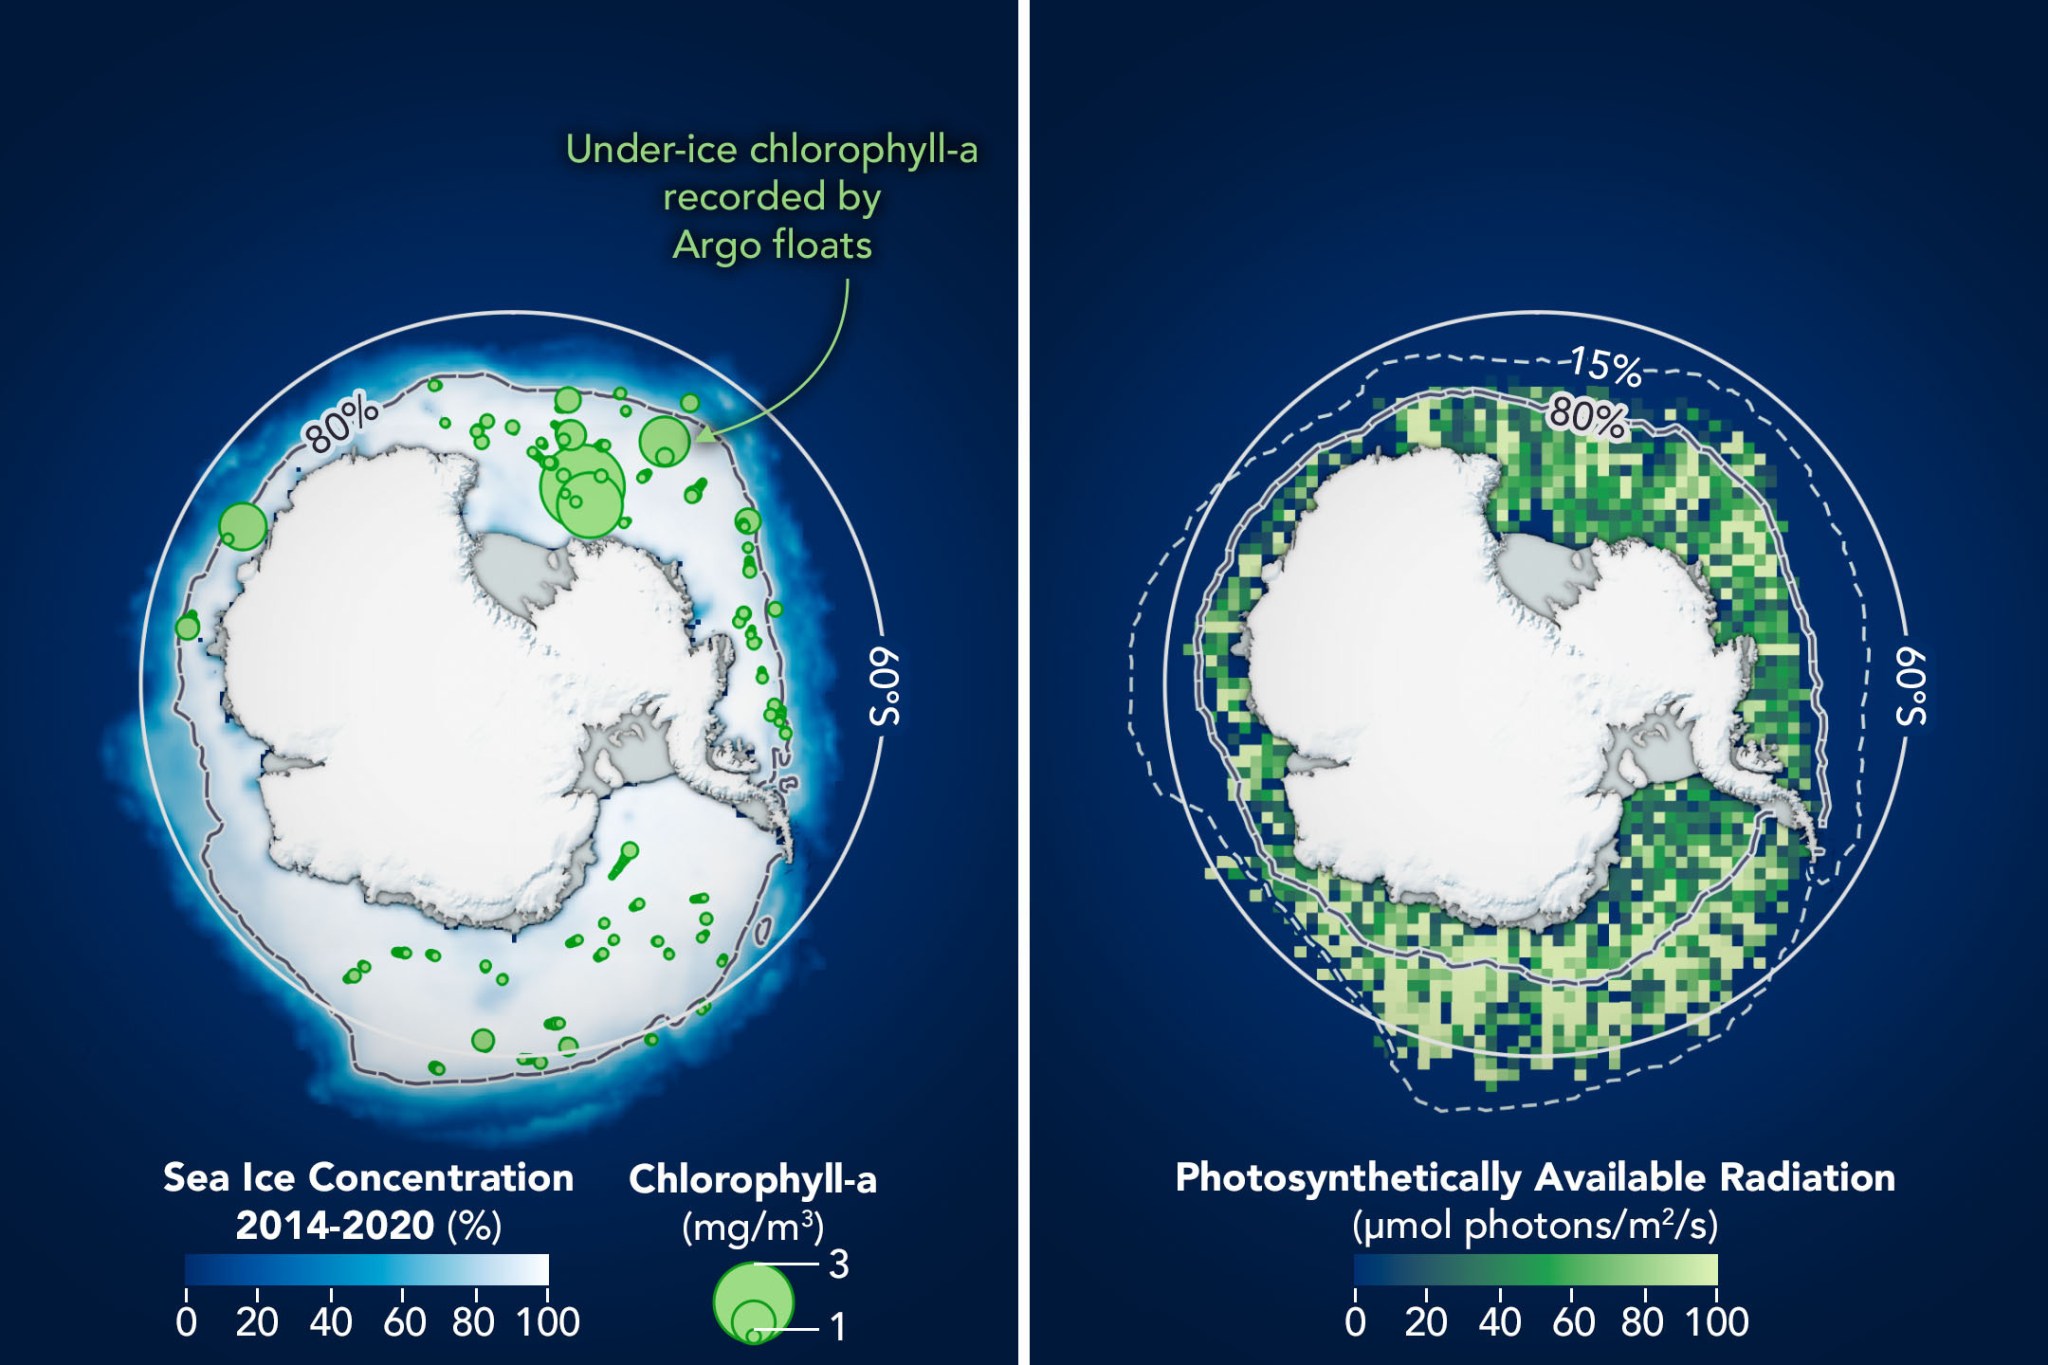 A visualization showing two side by side maps of Antarctica. The left map shows likely phytoplankton blooms surrounding the continent as green circles, and the right map illustrates where different amounts of light could penetrate ice with green pixels.